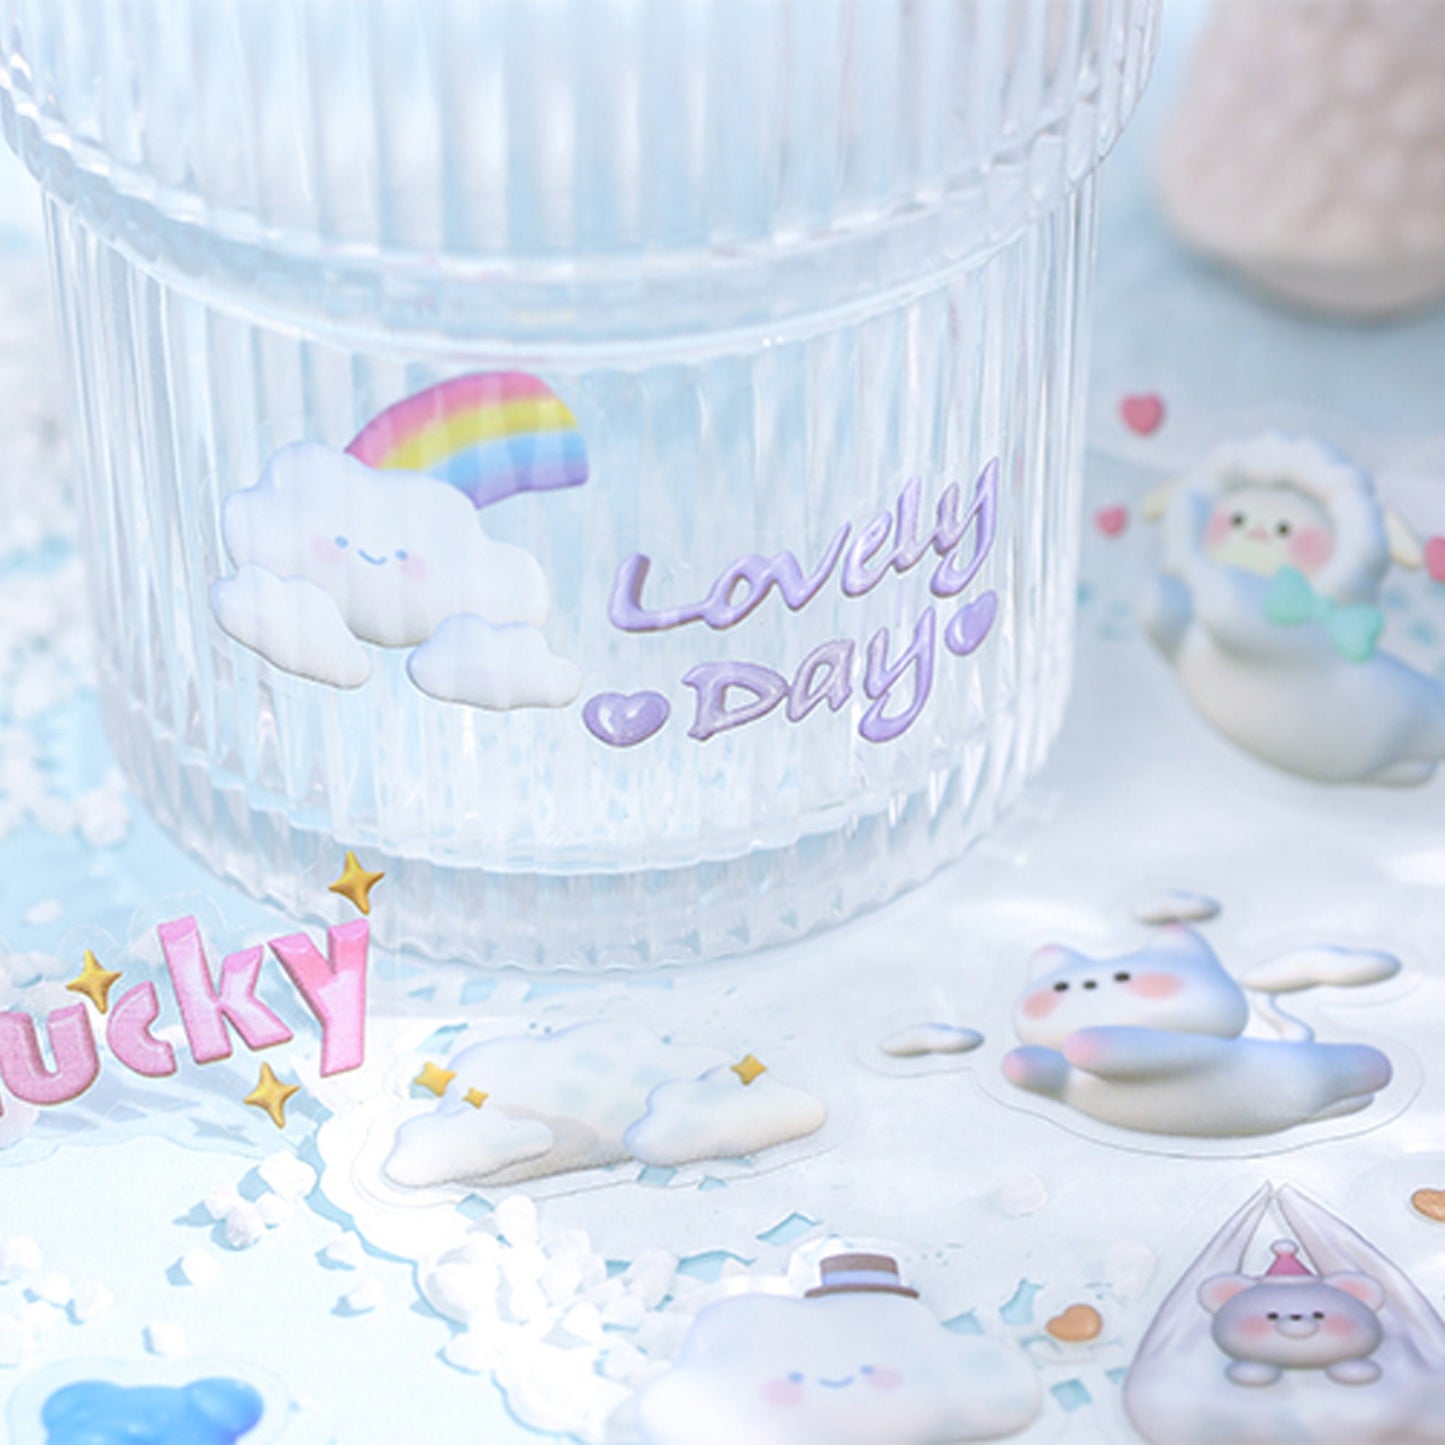 Kawaii Stickers, Cotton Candy World, Cute Stickers, Frosting Stickers, Journal Flakes Stickers, 3d Art Stickers, Clear Stickers - b2c